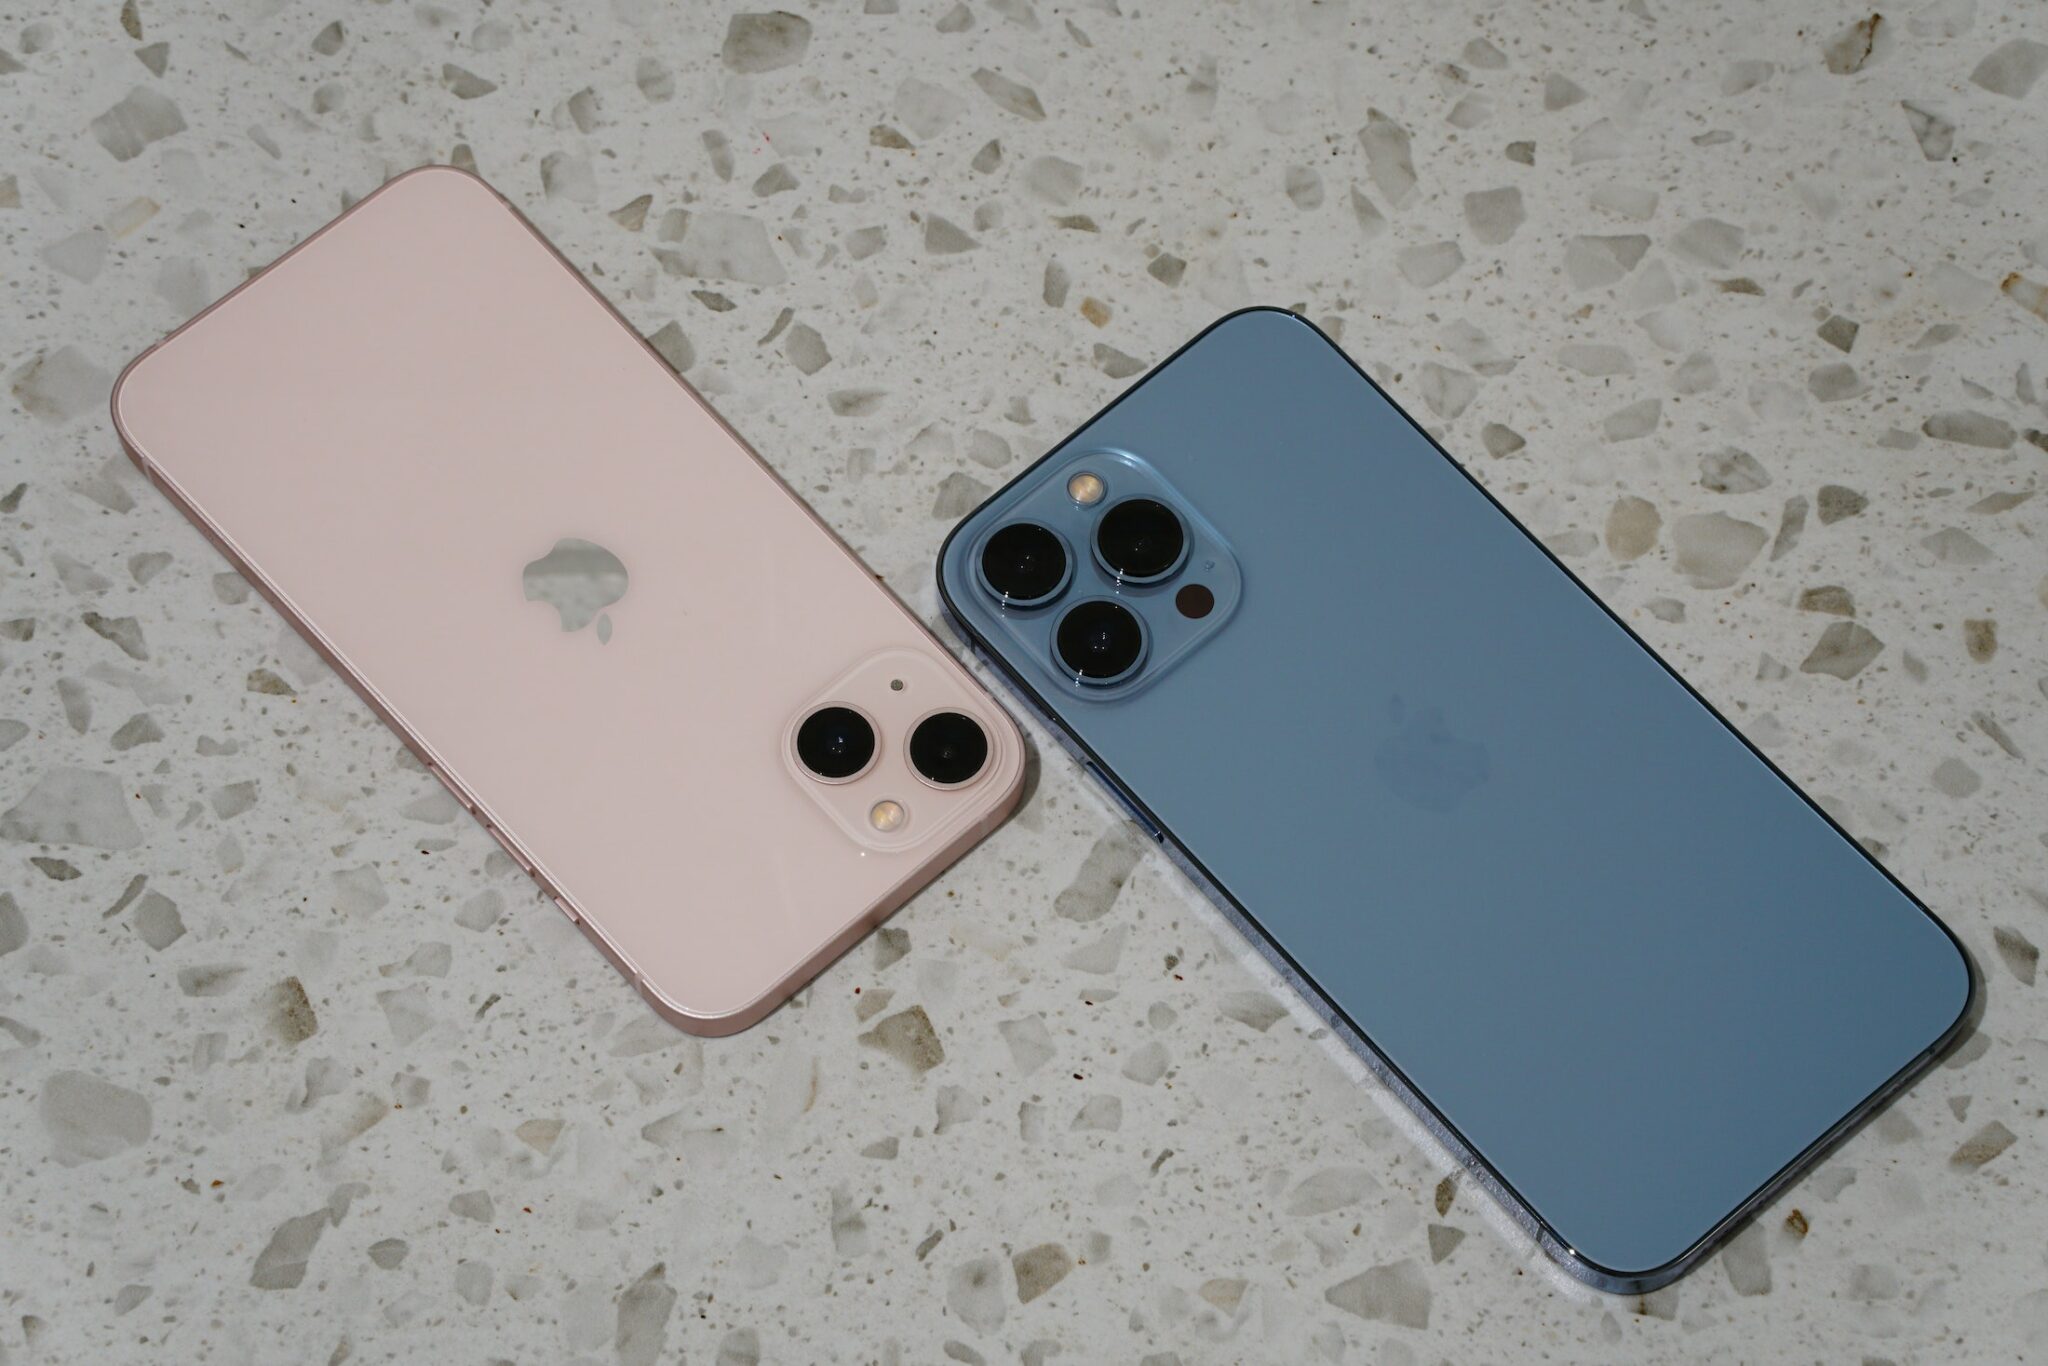 iPhone 13 and iPhone 13 Pro